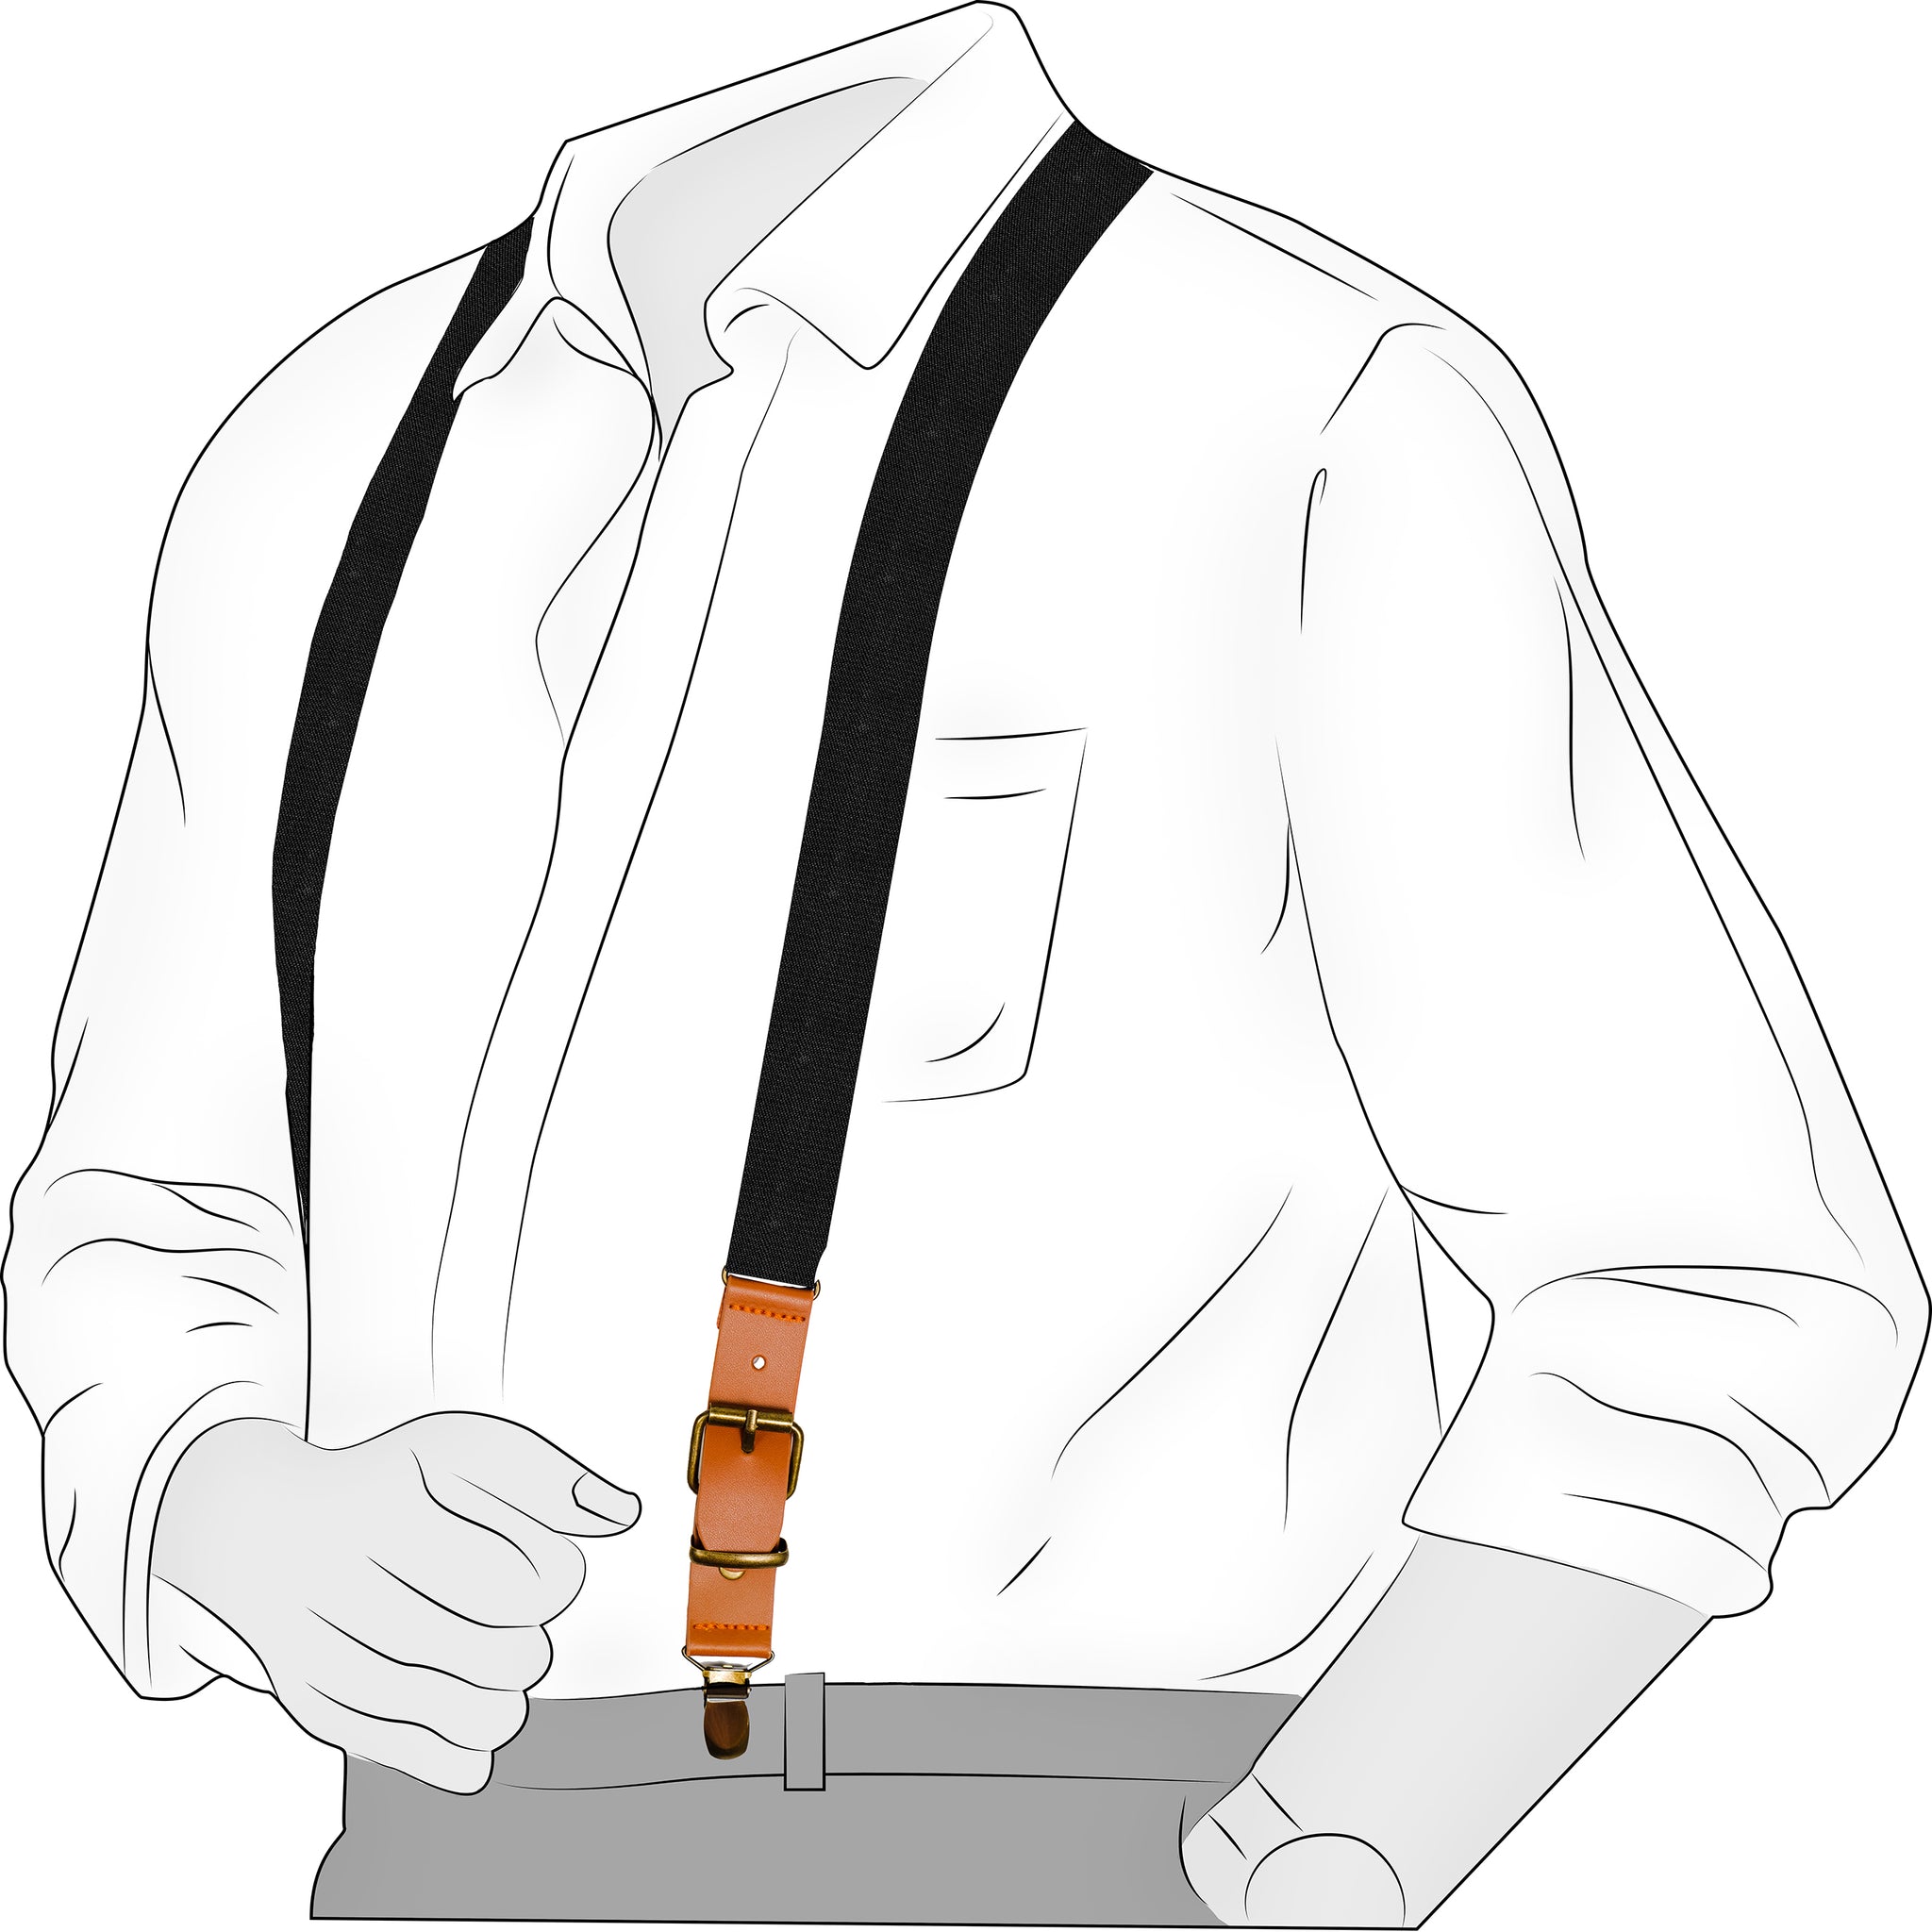 Chokore Y-shaped Suspenders with Leather detailing and adjustable Elastic Strap (Black)